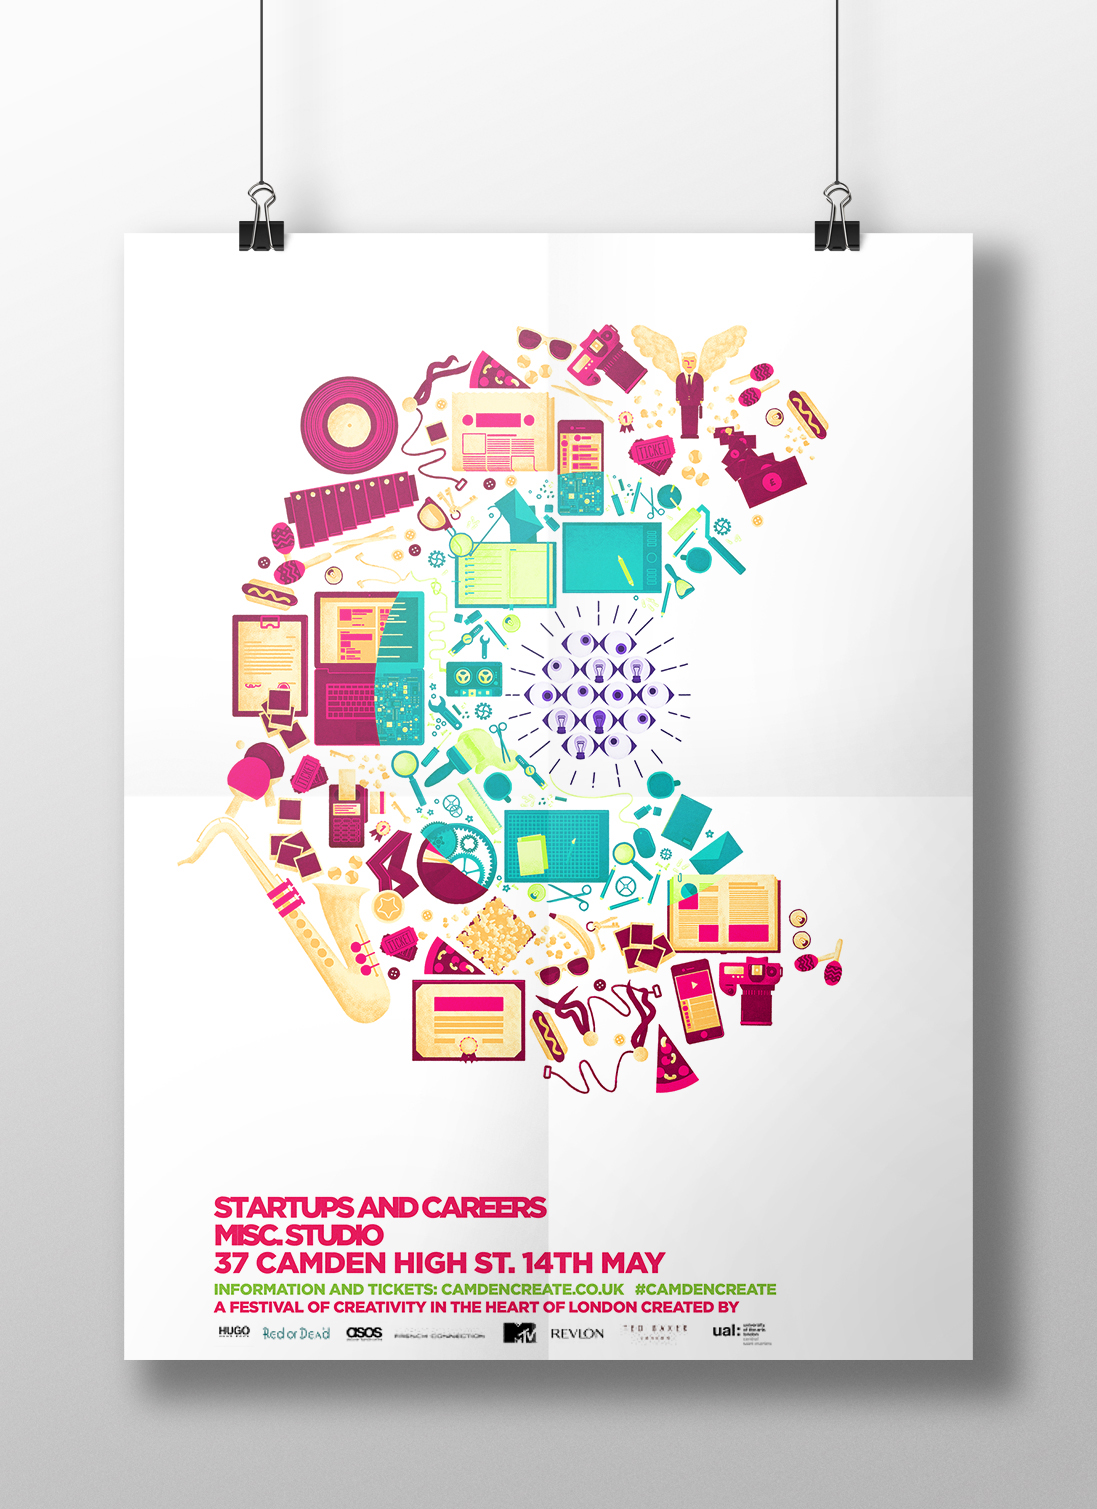 poster festival sprinkle cut view section vibrant bright camden Create Startup career London macbook iphone